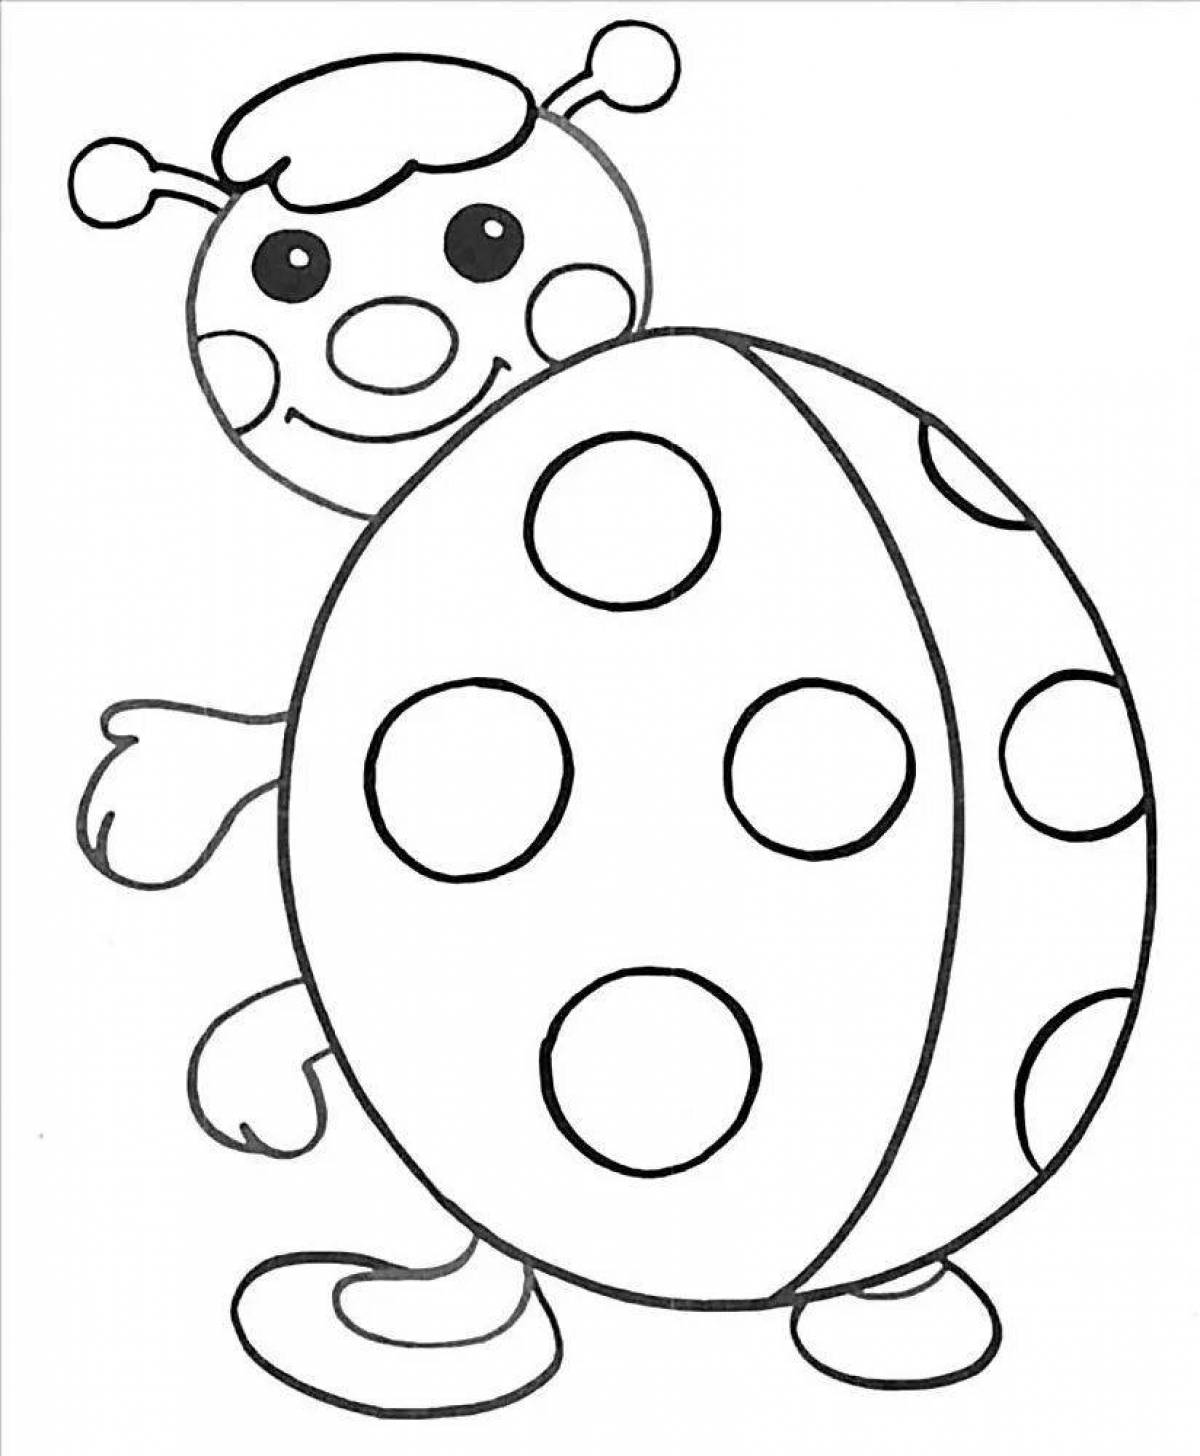 Adorable ladybug coloring book for 4-5 year olds